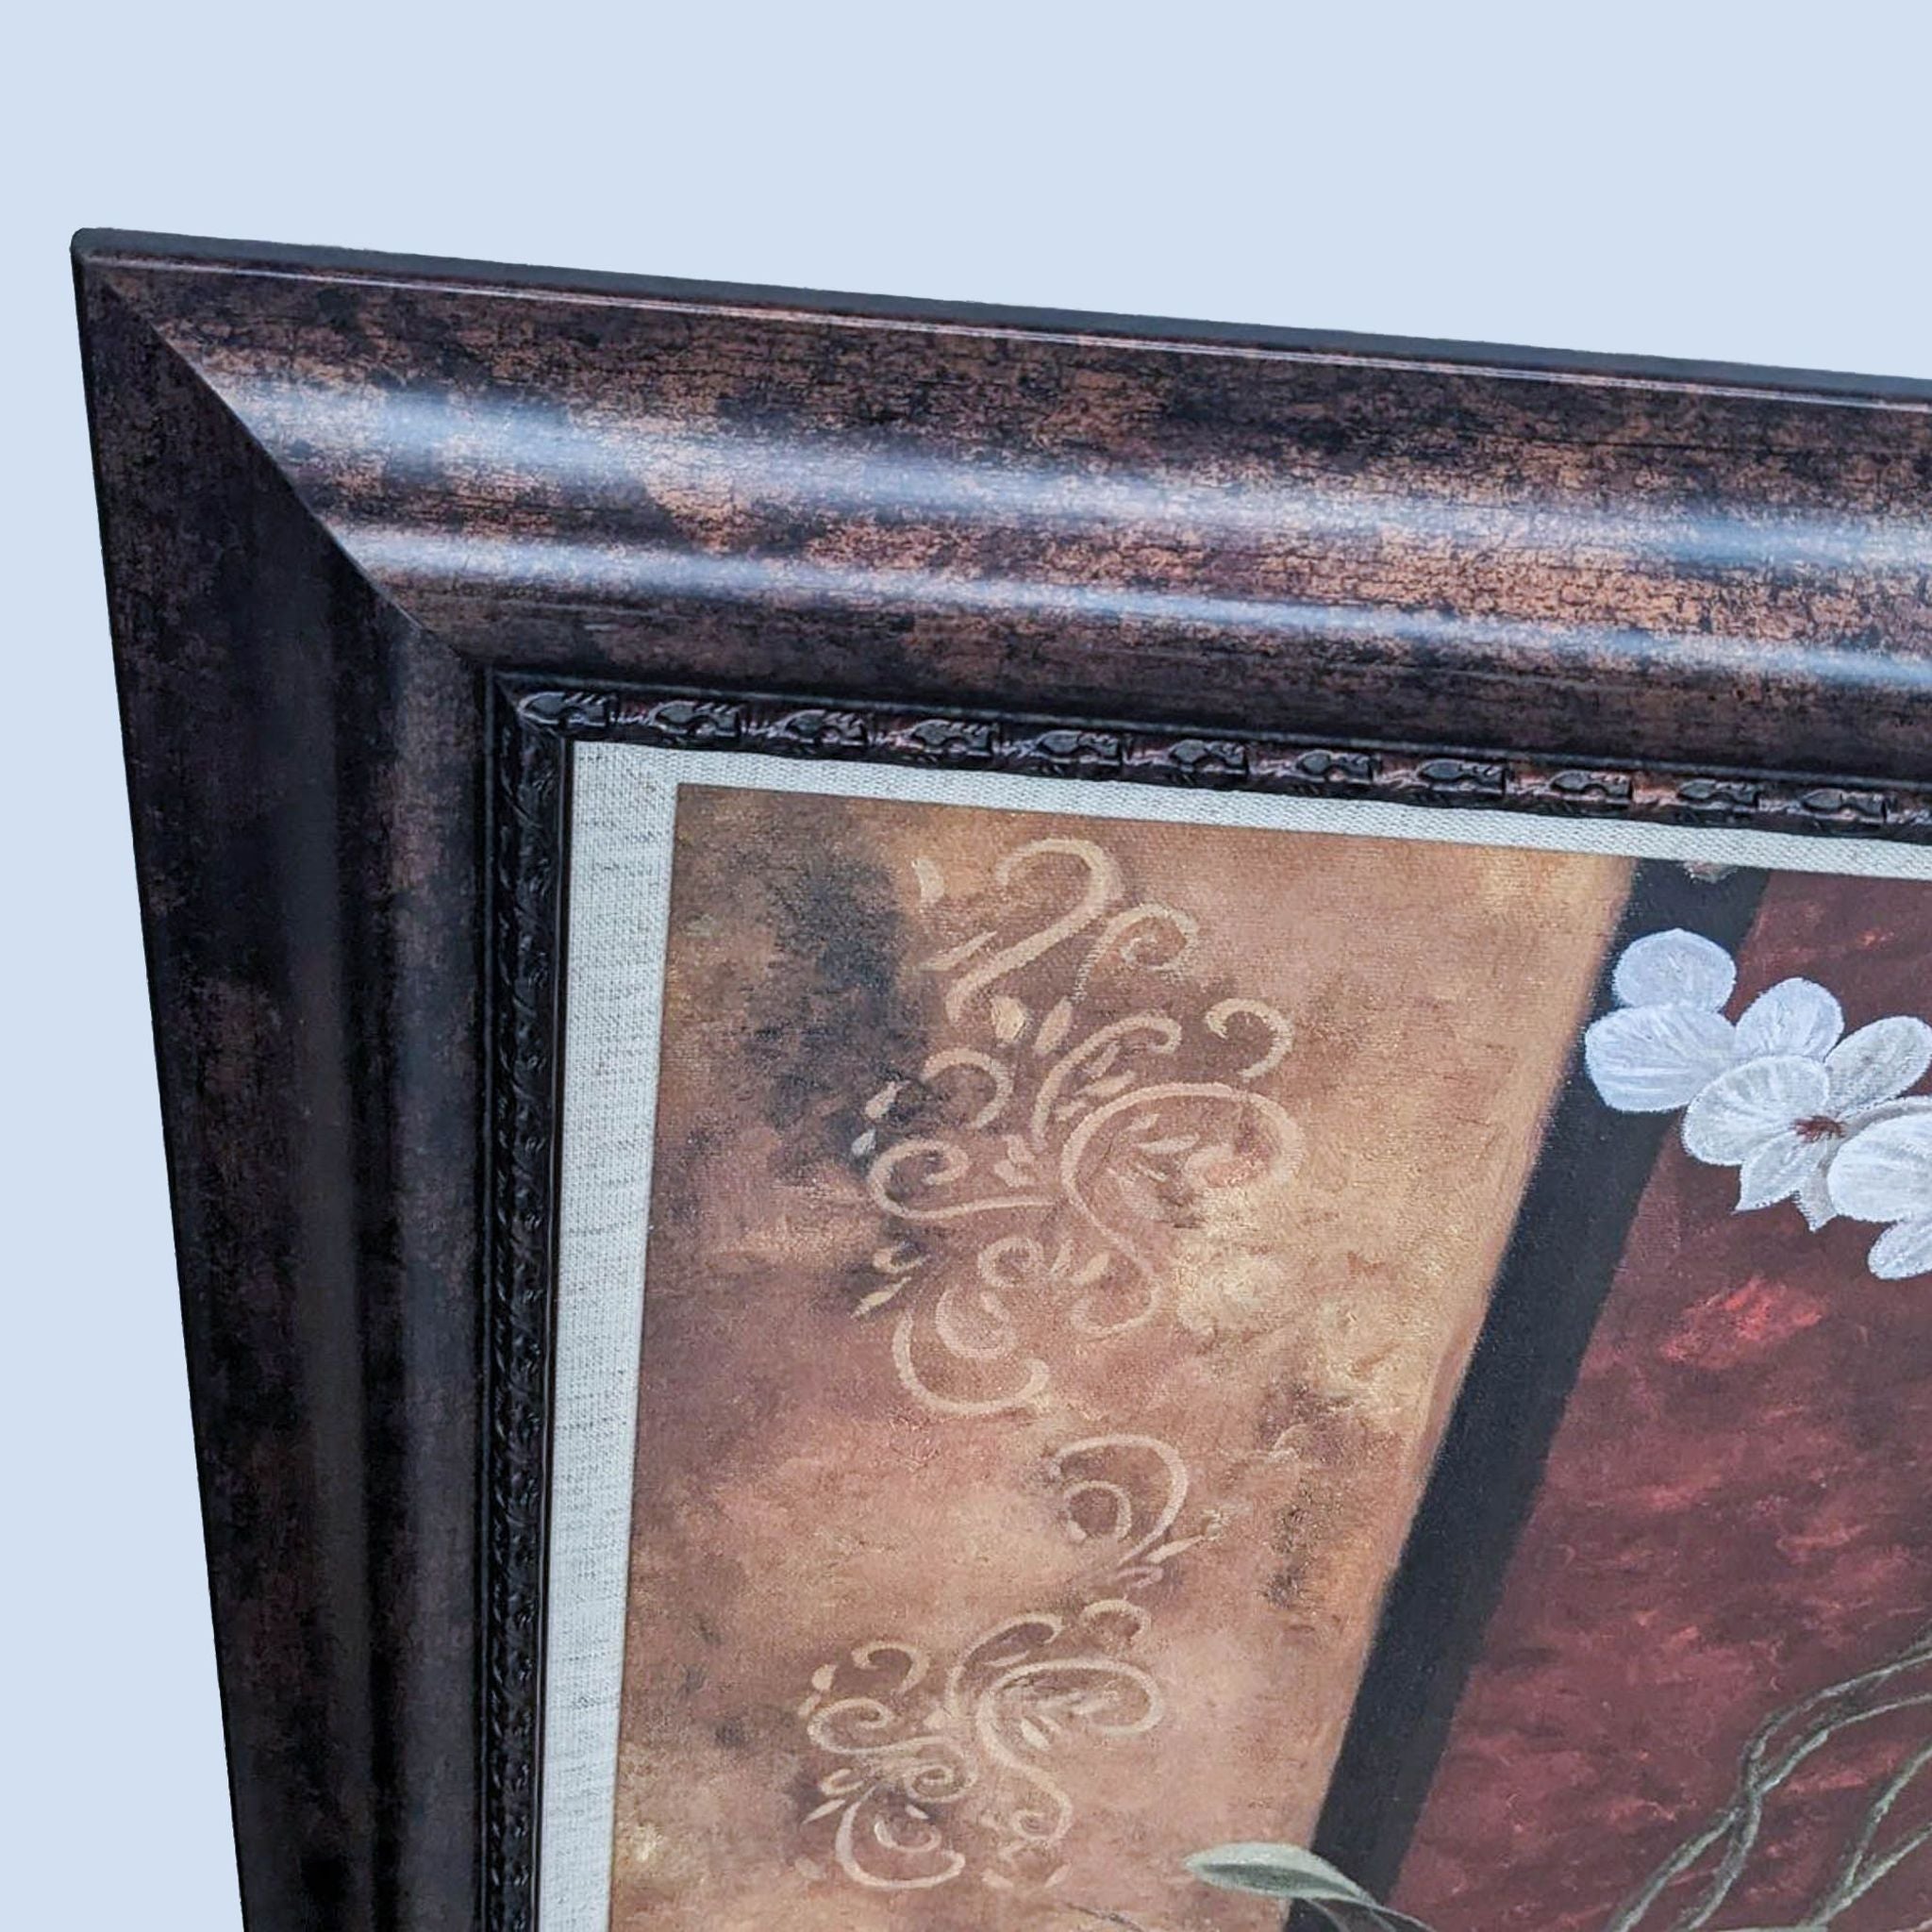 Close-up of a Reperch framed art print showing intricate floral and pattern details within a dark textured frame against a wooden backdrop.